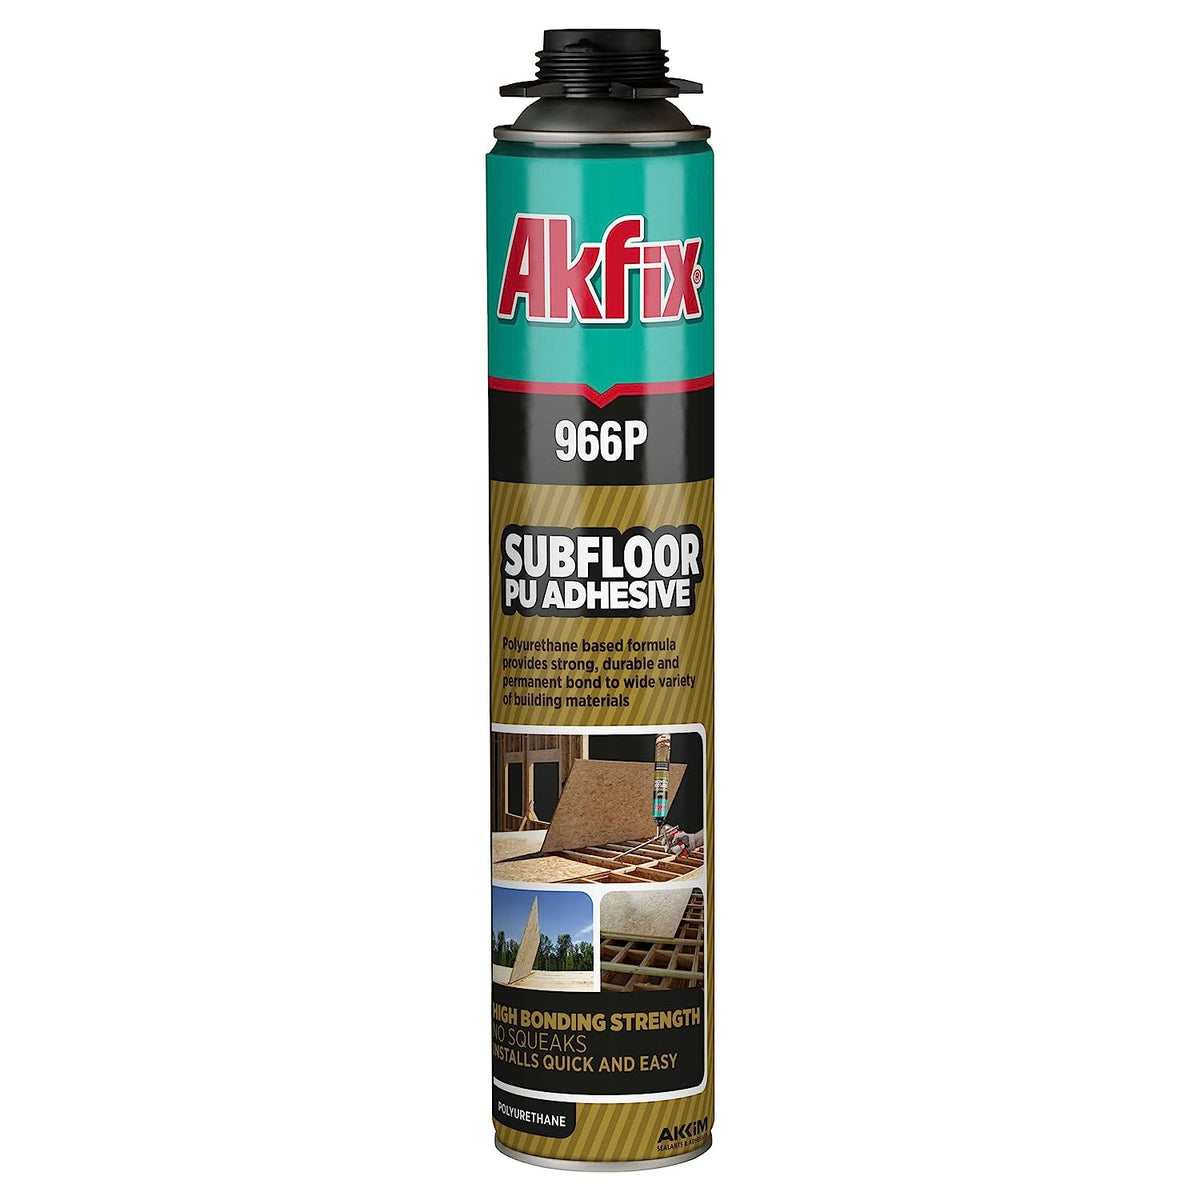 What is spray adhesive used for?